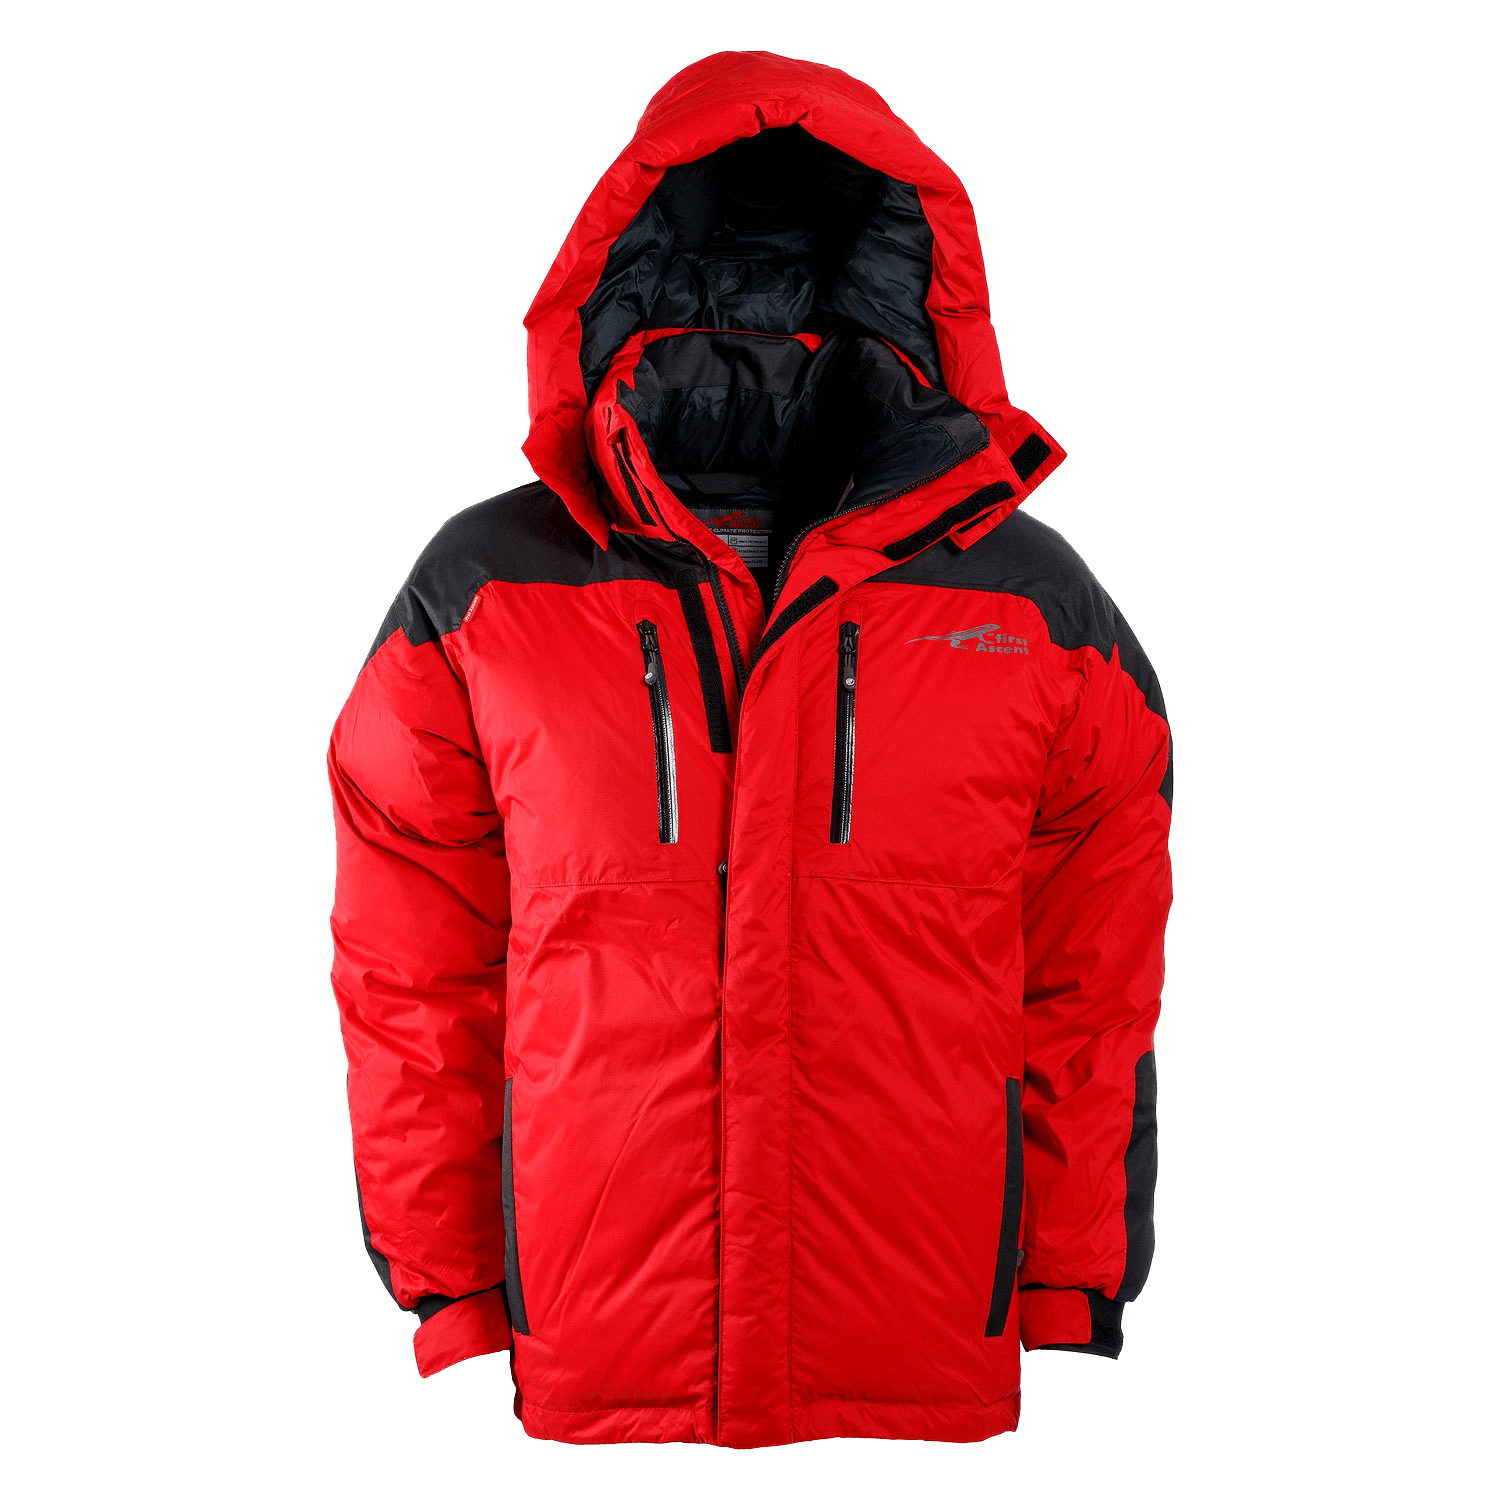 Explore Down Jacket Guide - First Ascent